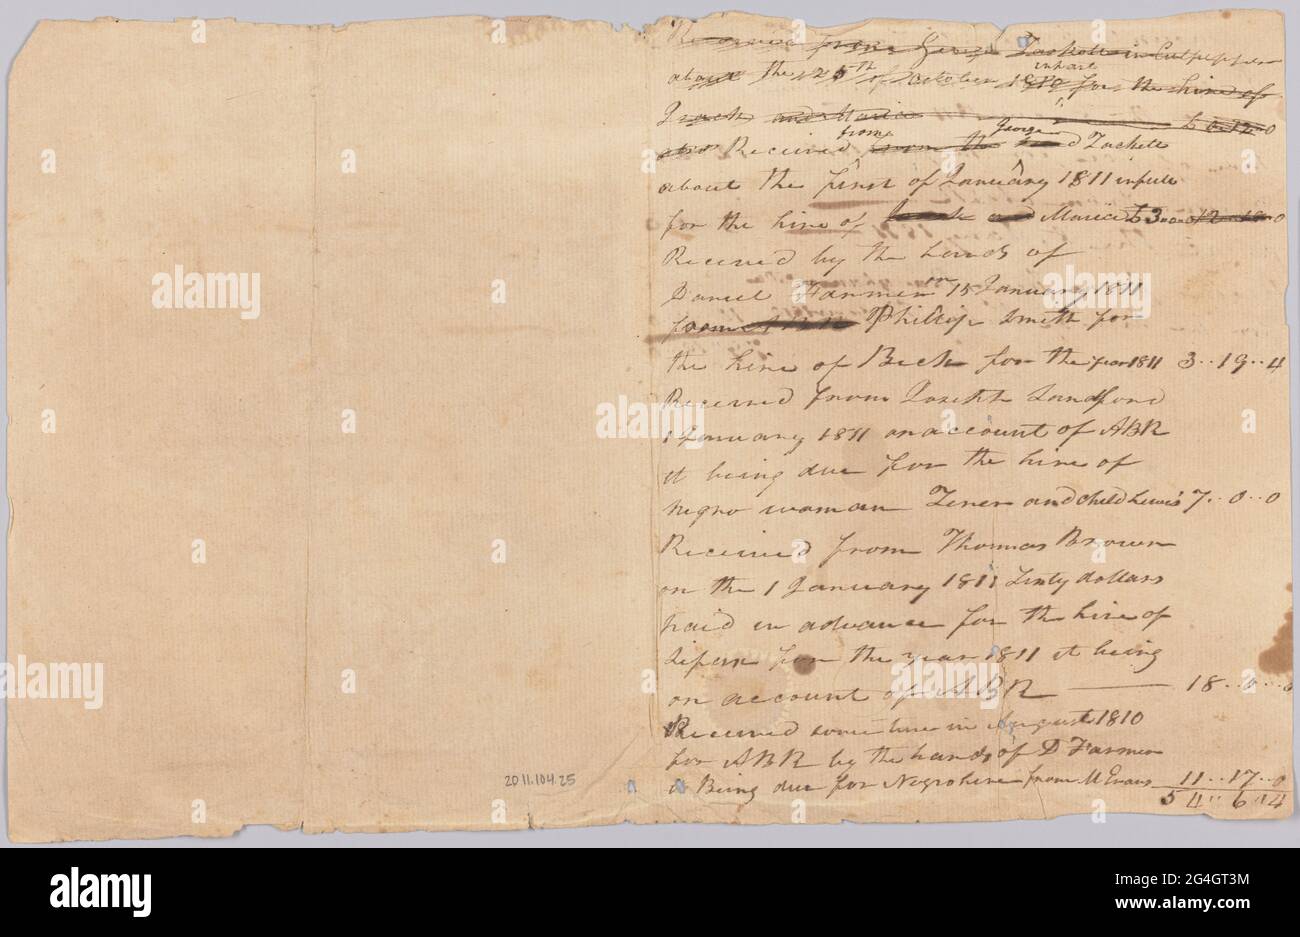 This document is from a collection of financial papers related to the plantation operations of several generations of the Rouzee Family in Essex County, Virginia. The papers date from the 1790s through 1860. This document is an accounting record for the years 1810 and 1811 with some of the entries pertaining to the hiring out of enslaved persons and the amount due the enslavers for the labor or services performed. The document is a single page folded vertically multiple times and handwritten in black ink. Stock Photo